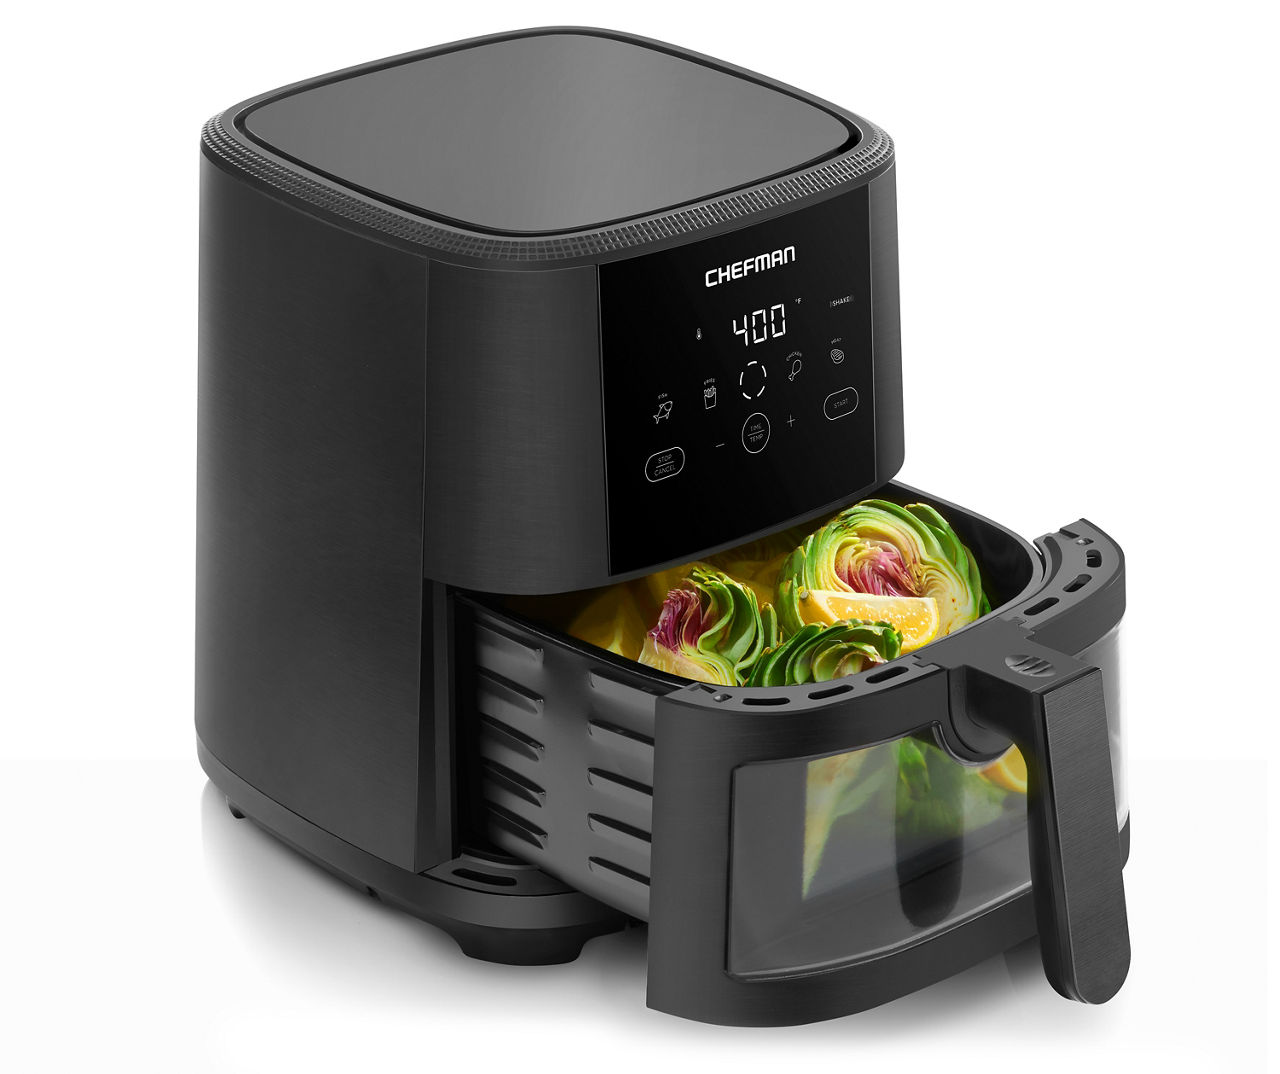 Chefman TurboFry Air Fryer Review - Top Reviewed Compact Air Fryer